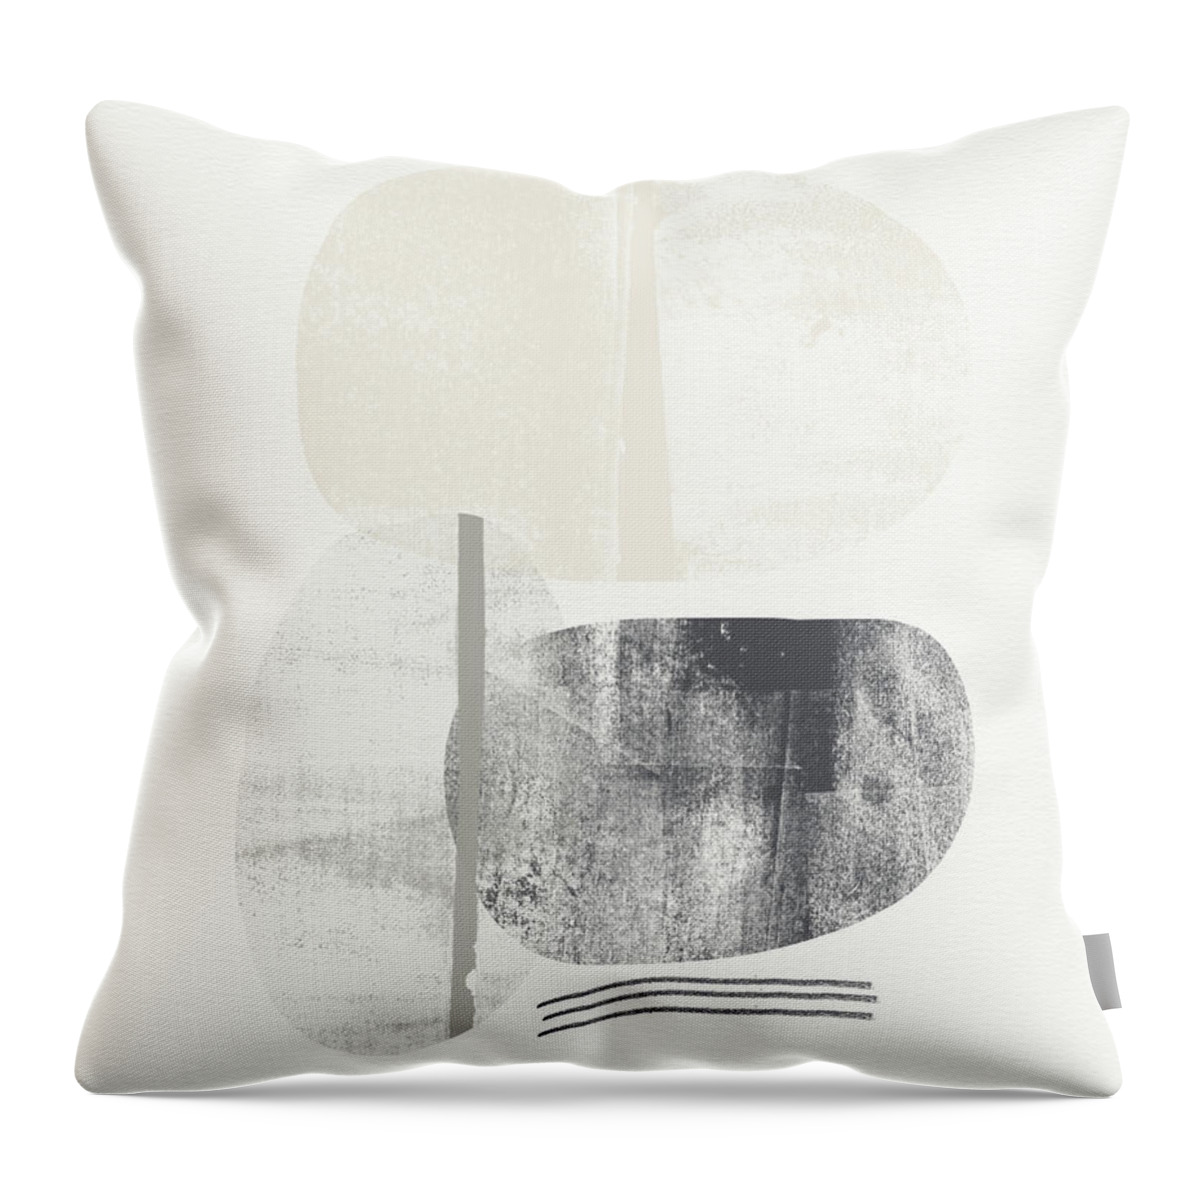 Modern Throw Pillow featuring the painting Stones 2- Art by Linda Woods by Linda Woods